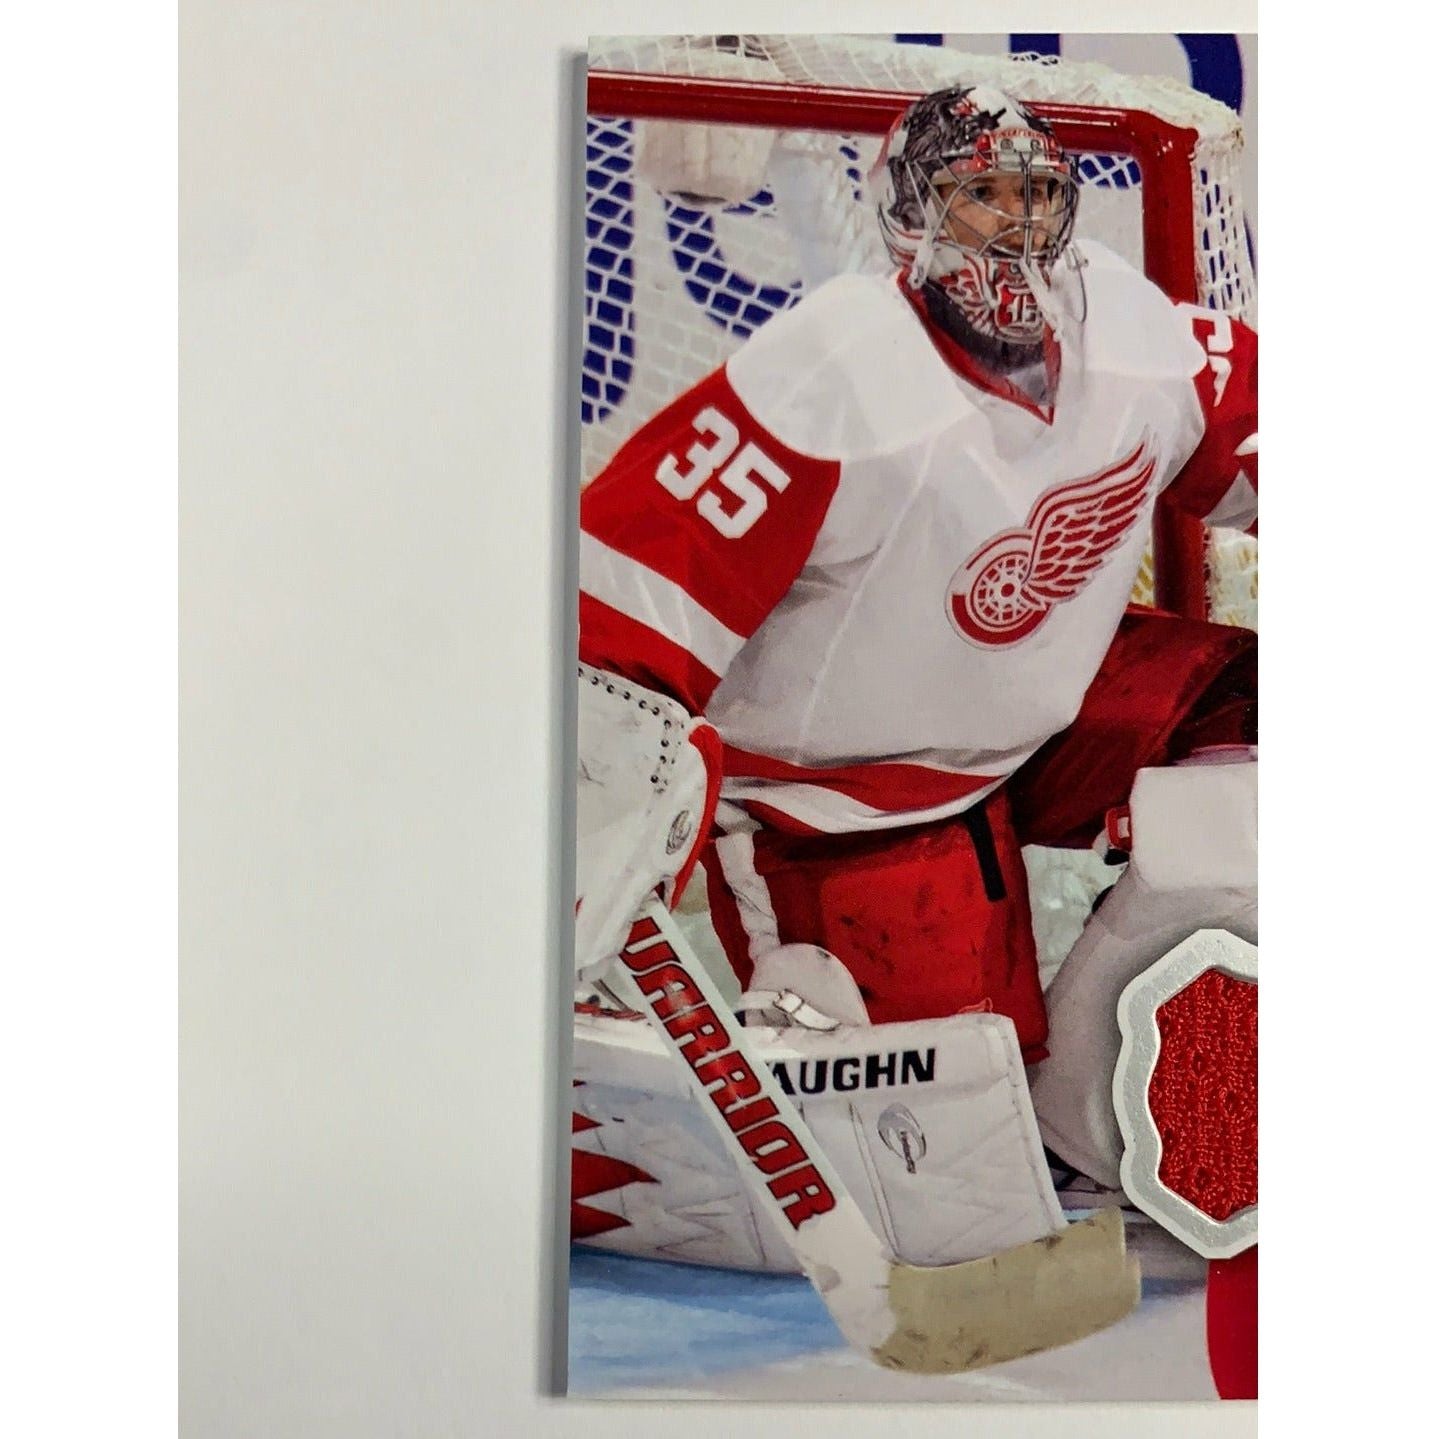 2014-15 Upper Deck Series 1 Jimmy Howard UD Game Jersey